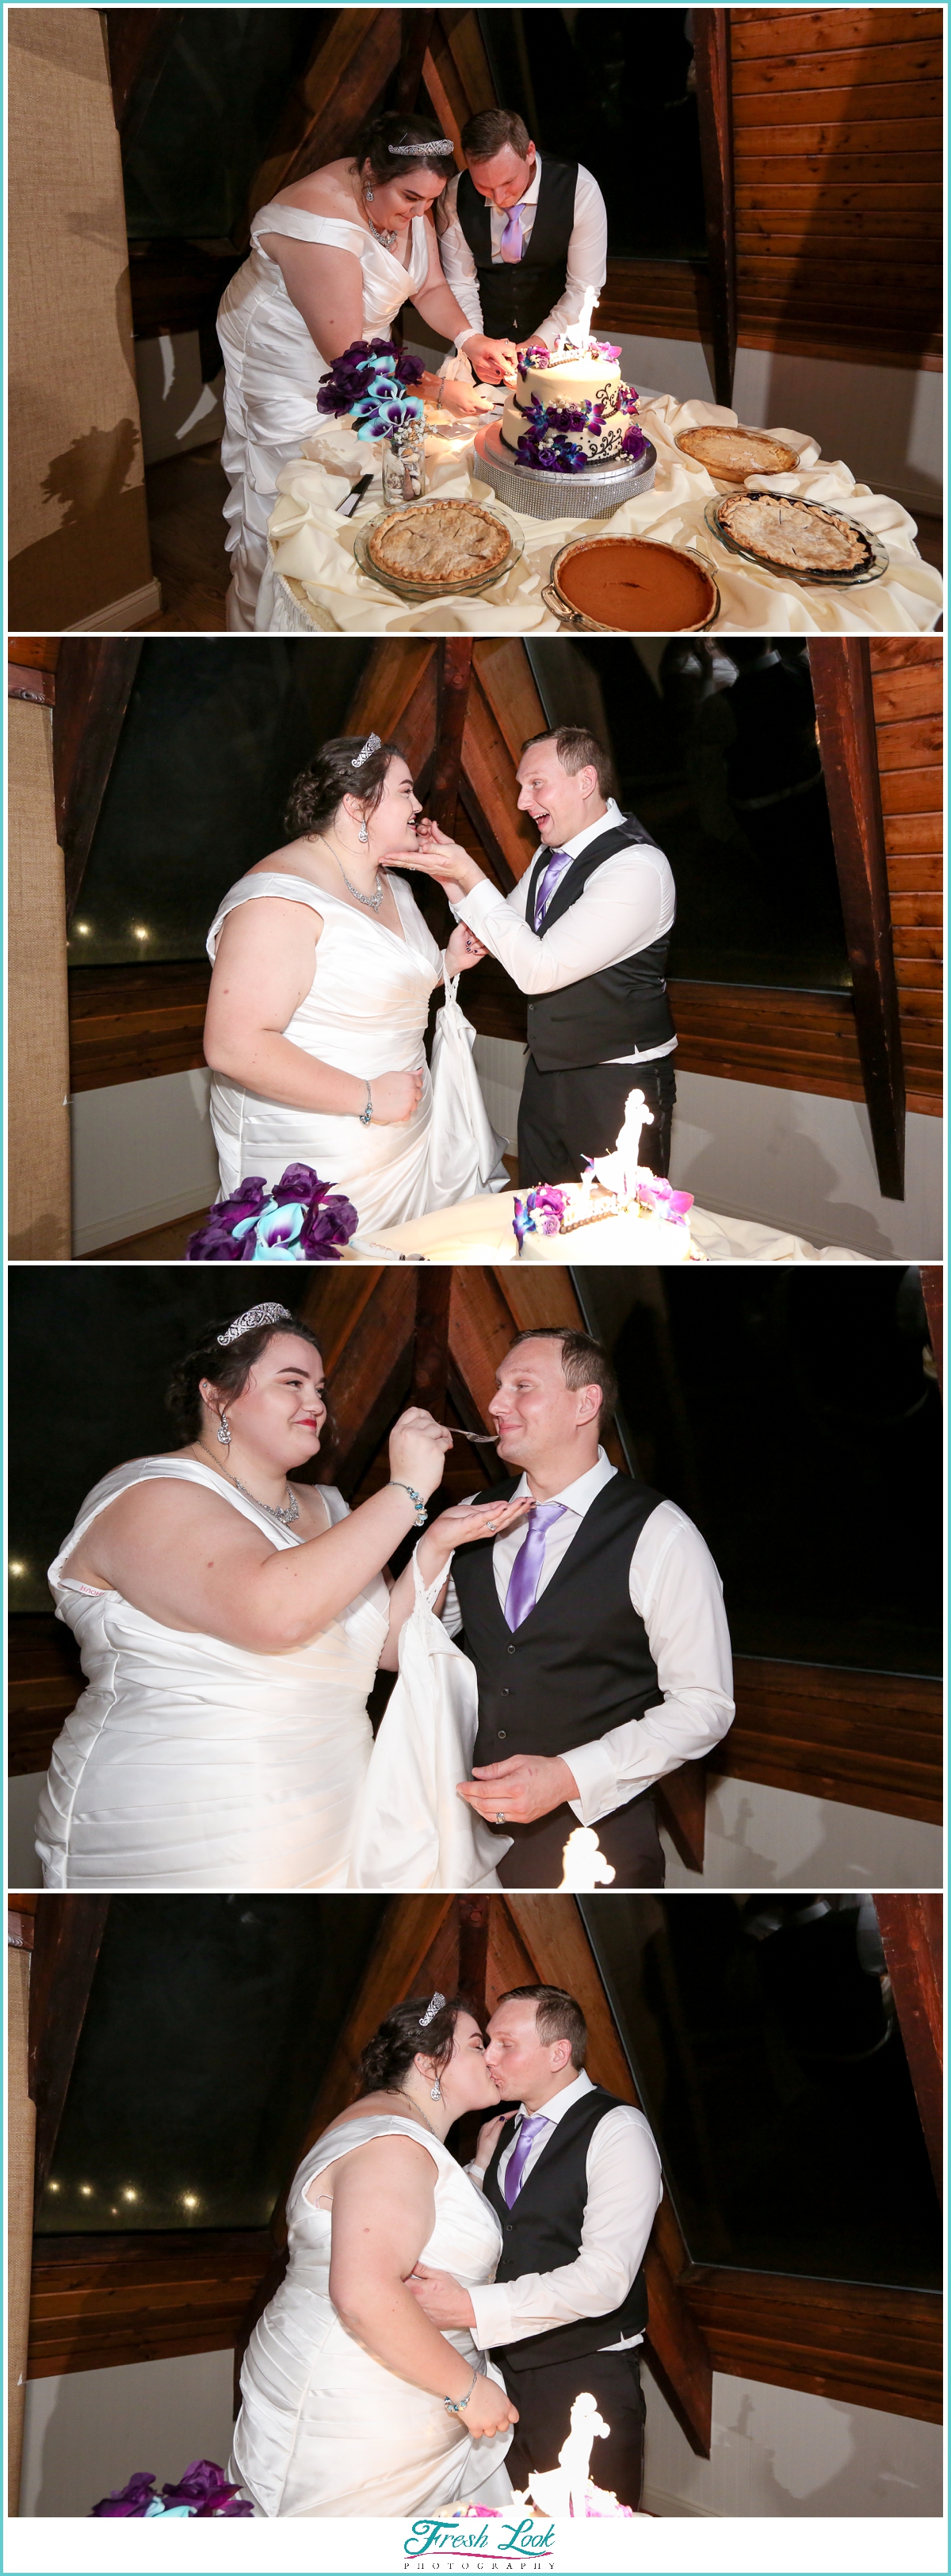 bride and groom feeding each other cake